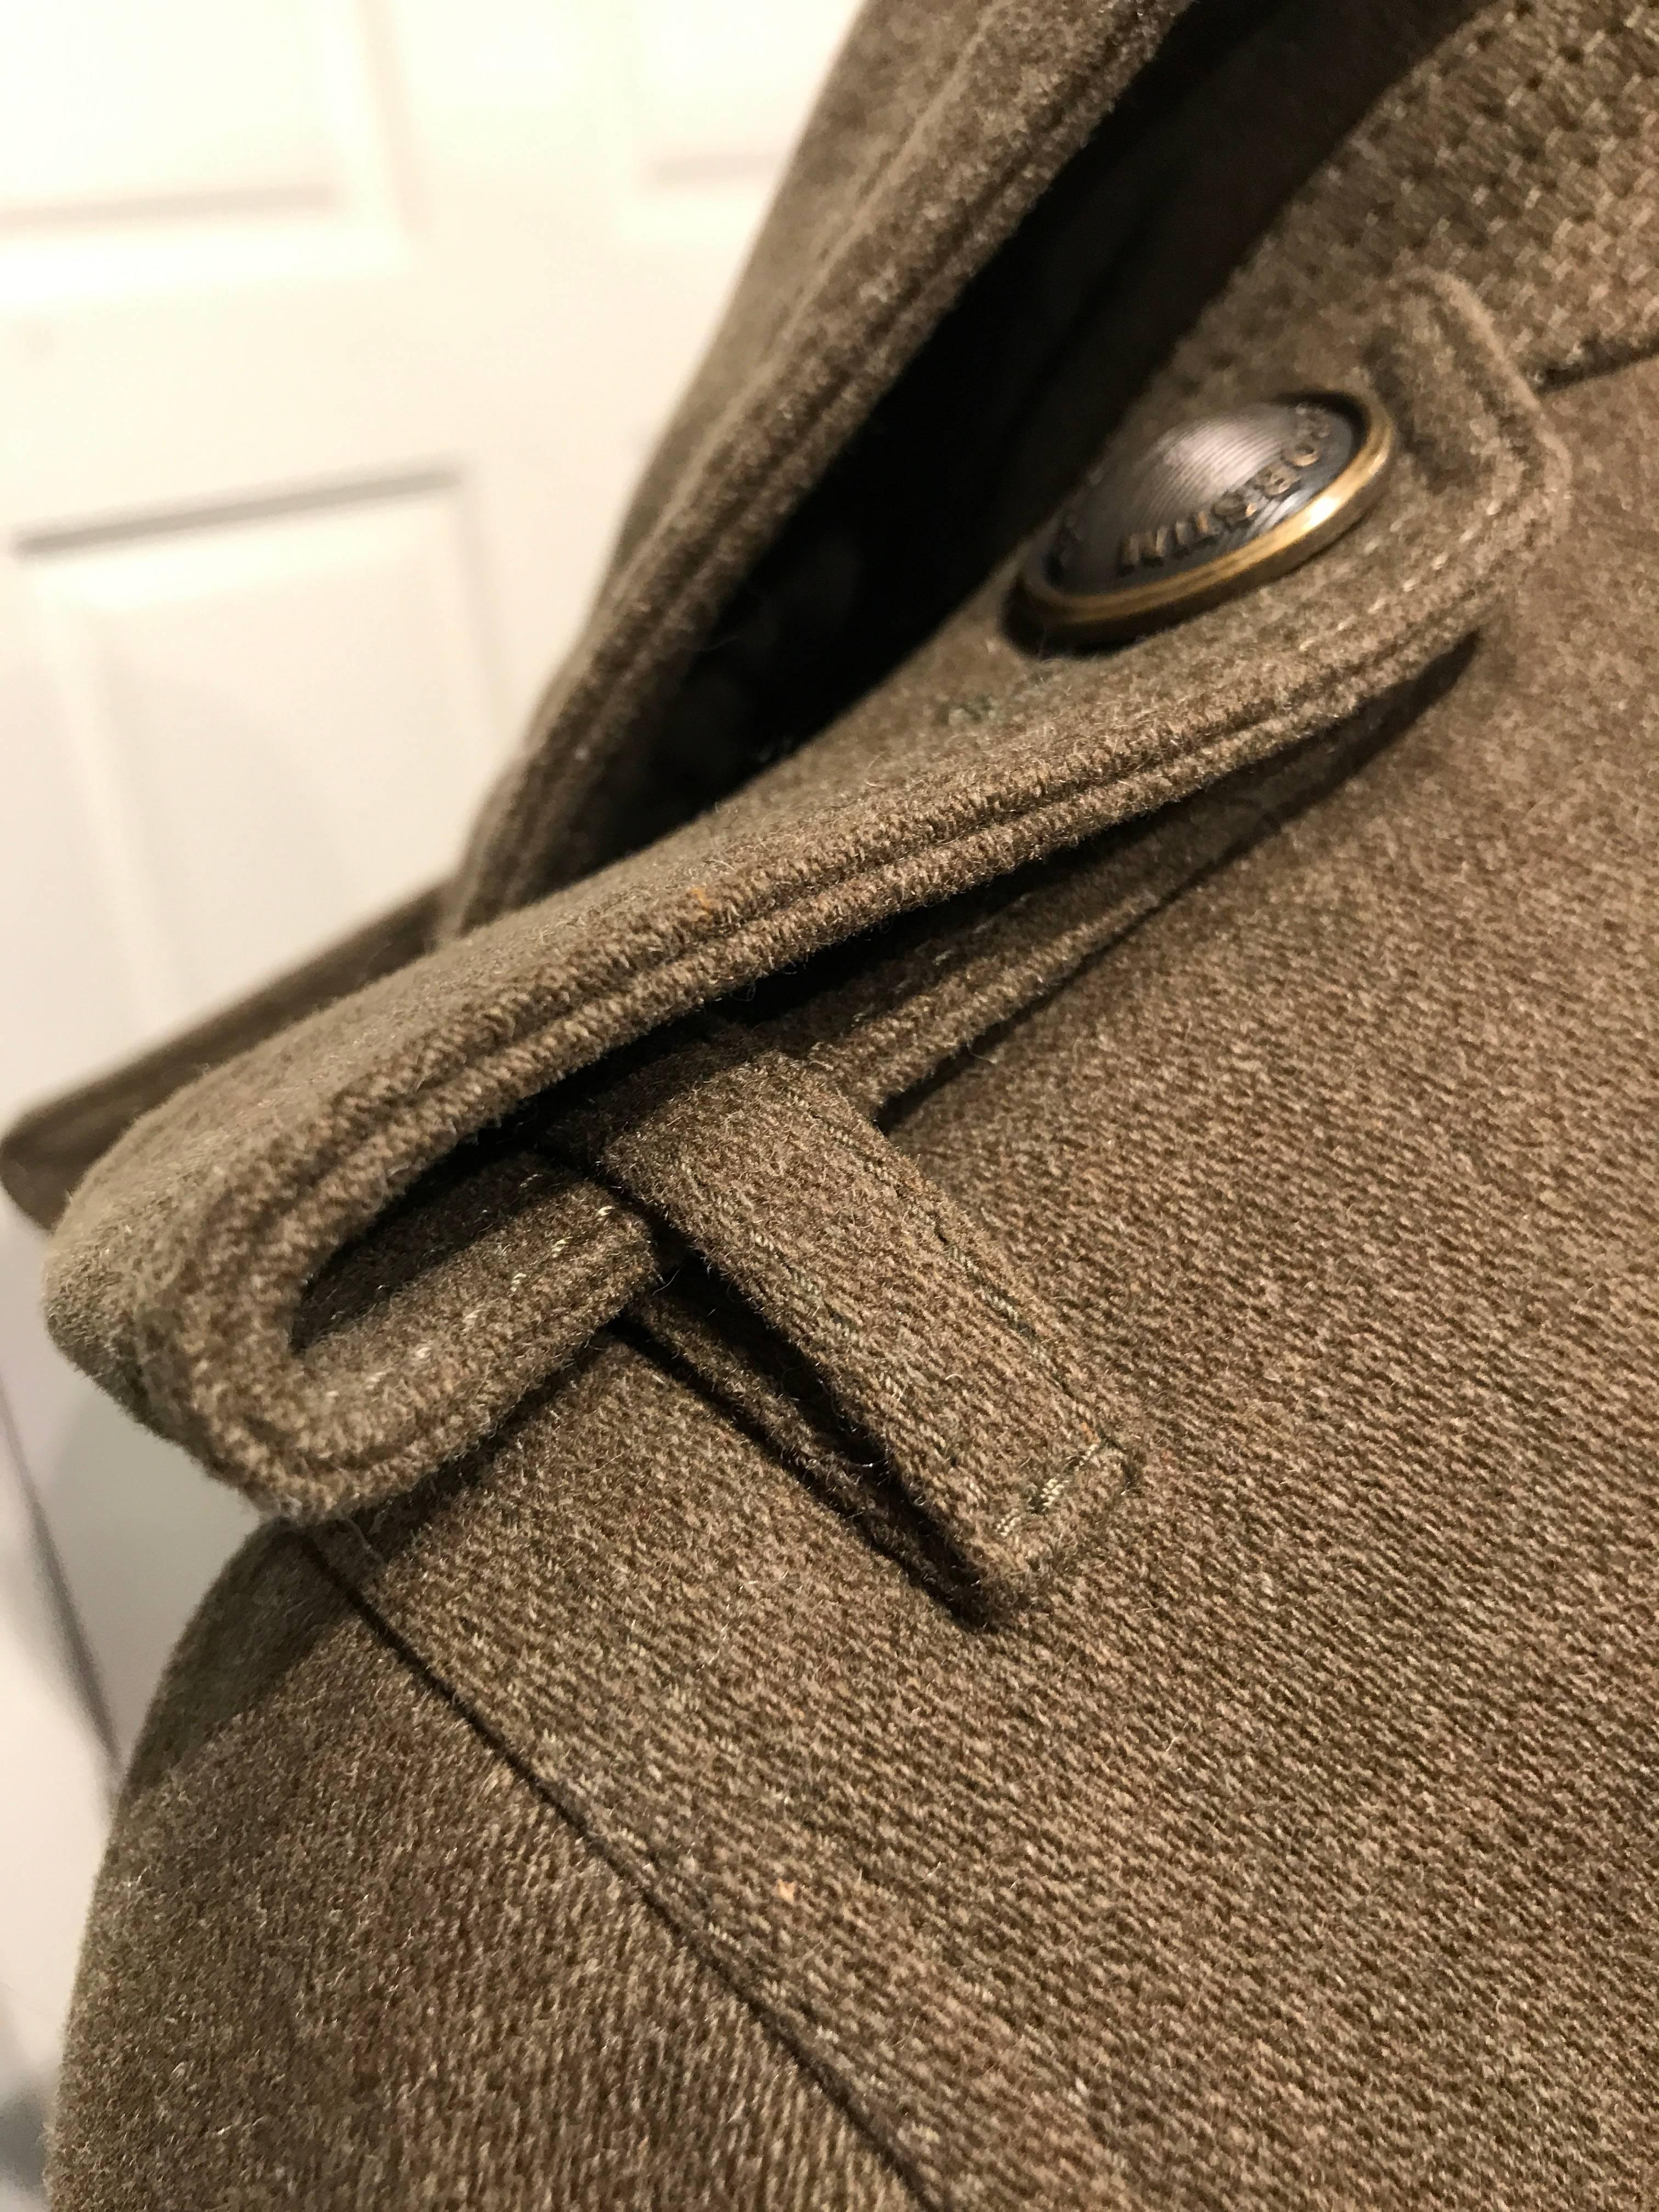 Burberry Prorsum Army Green Wool Coat With Black Shearling Skirt Sz 38 (Us2) For Sale 1